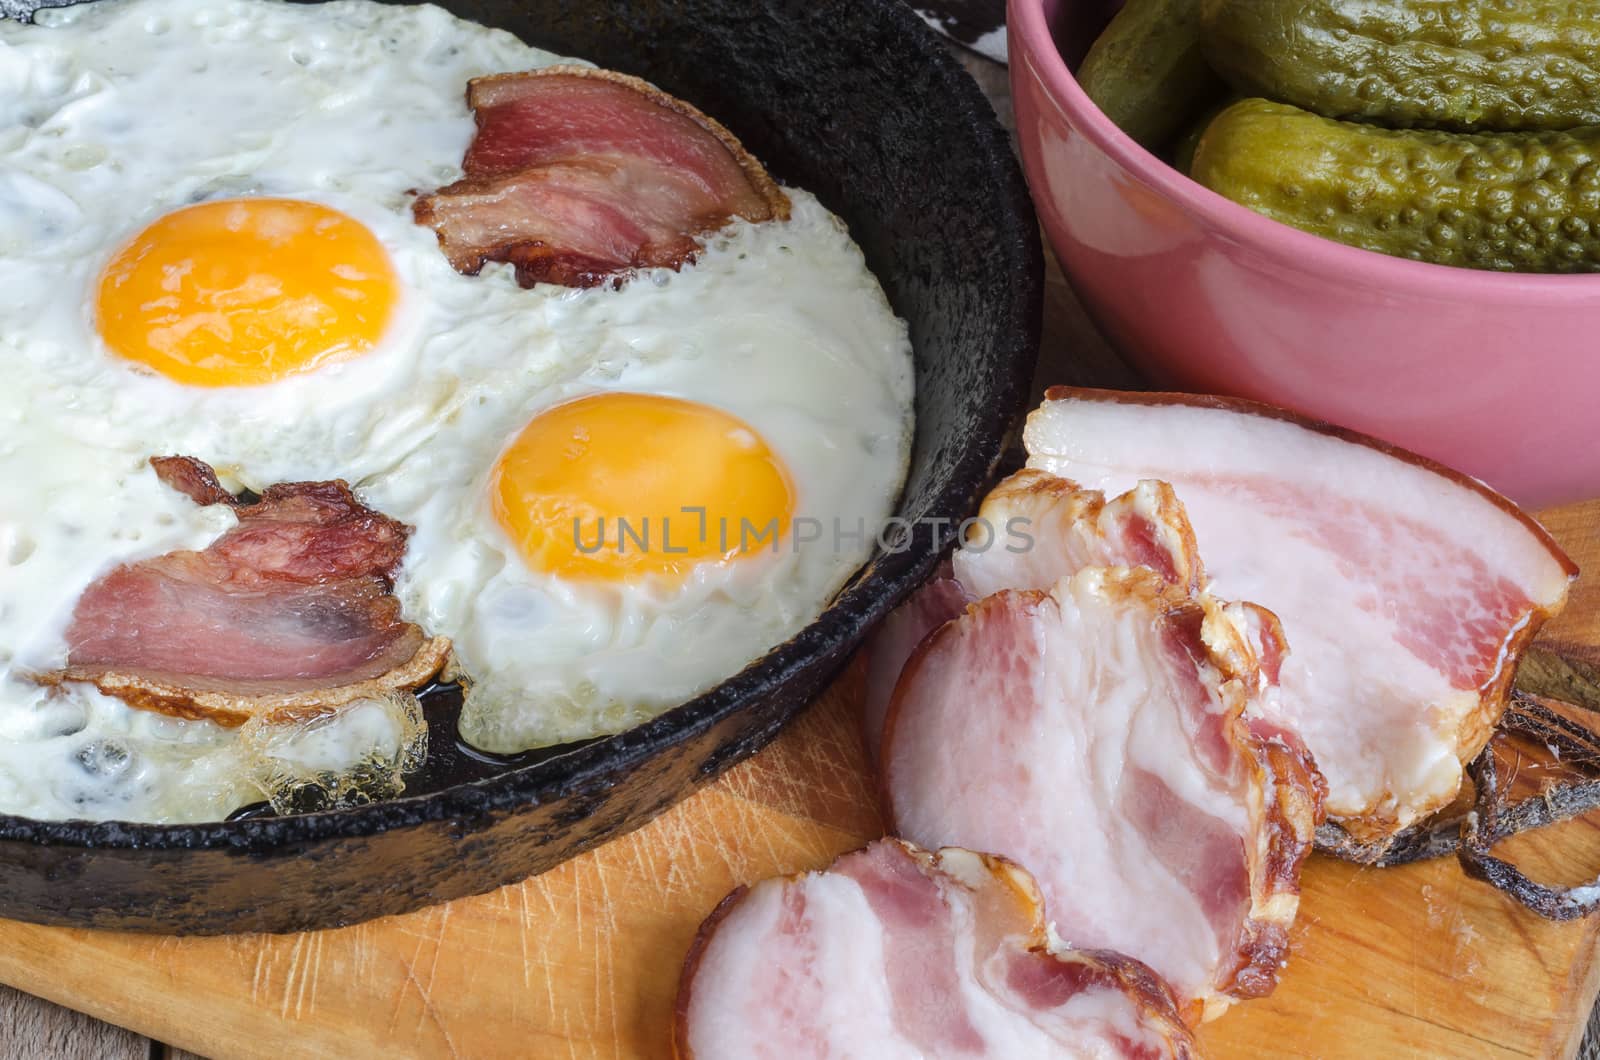 Bacon and eggs in an old pan on the Board. Sliced bacon and pickles in a bowl.